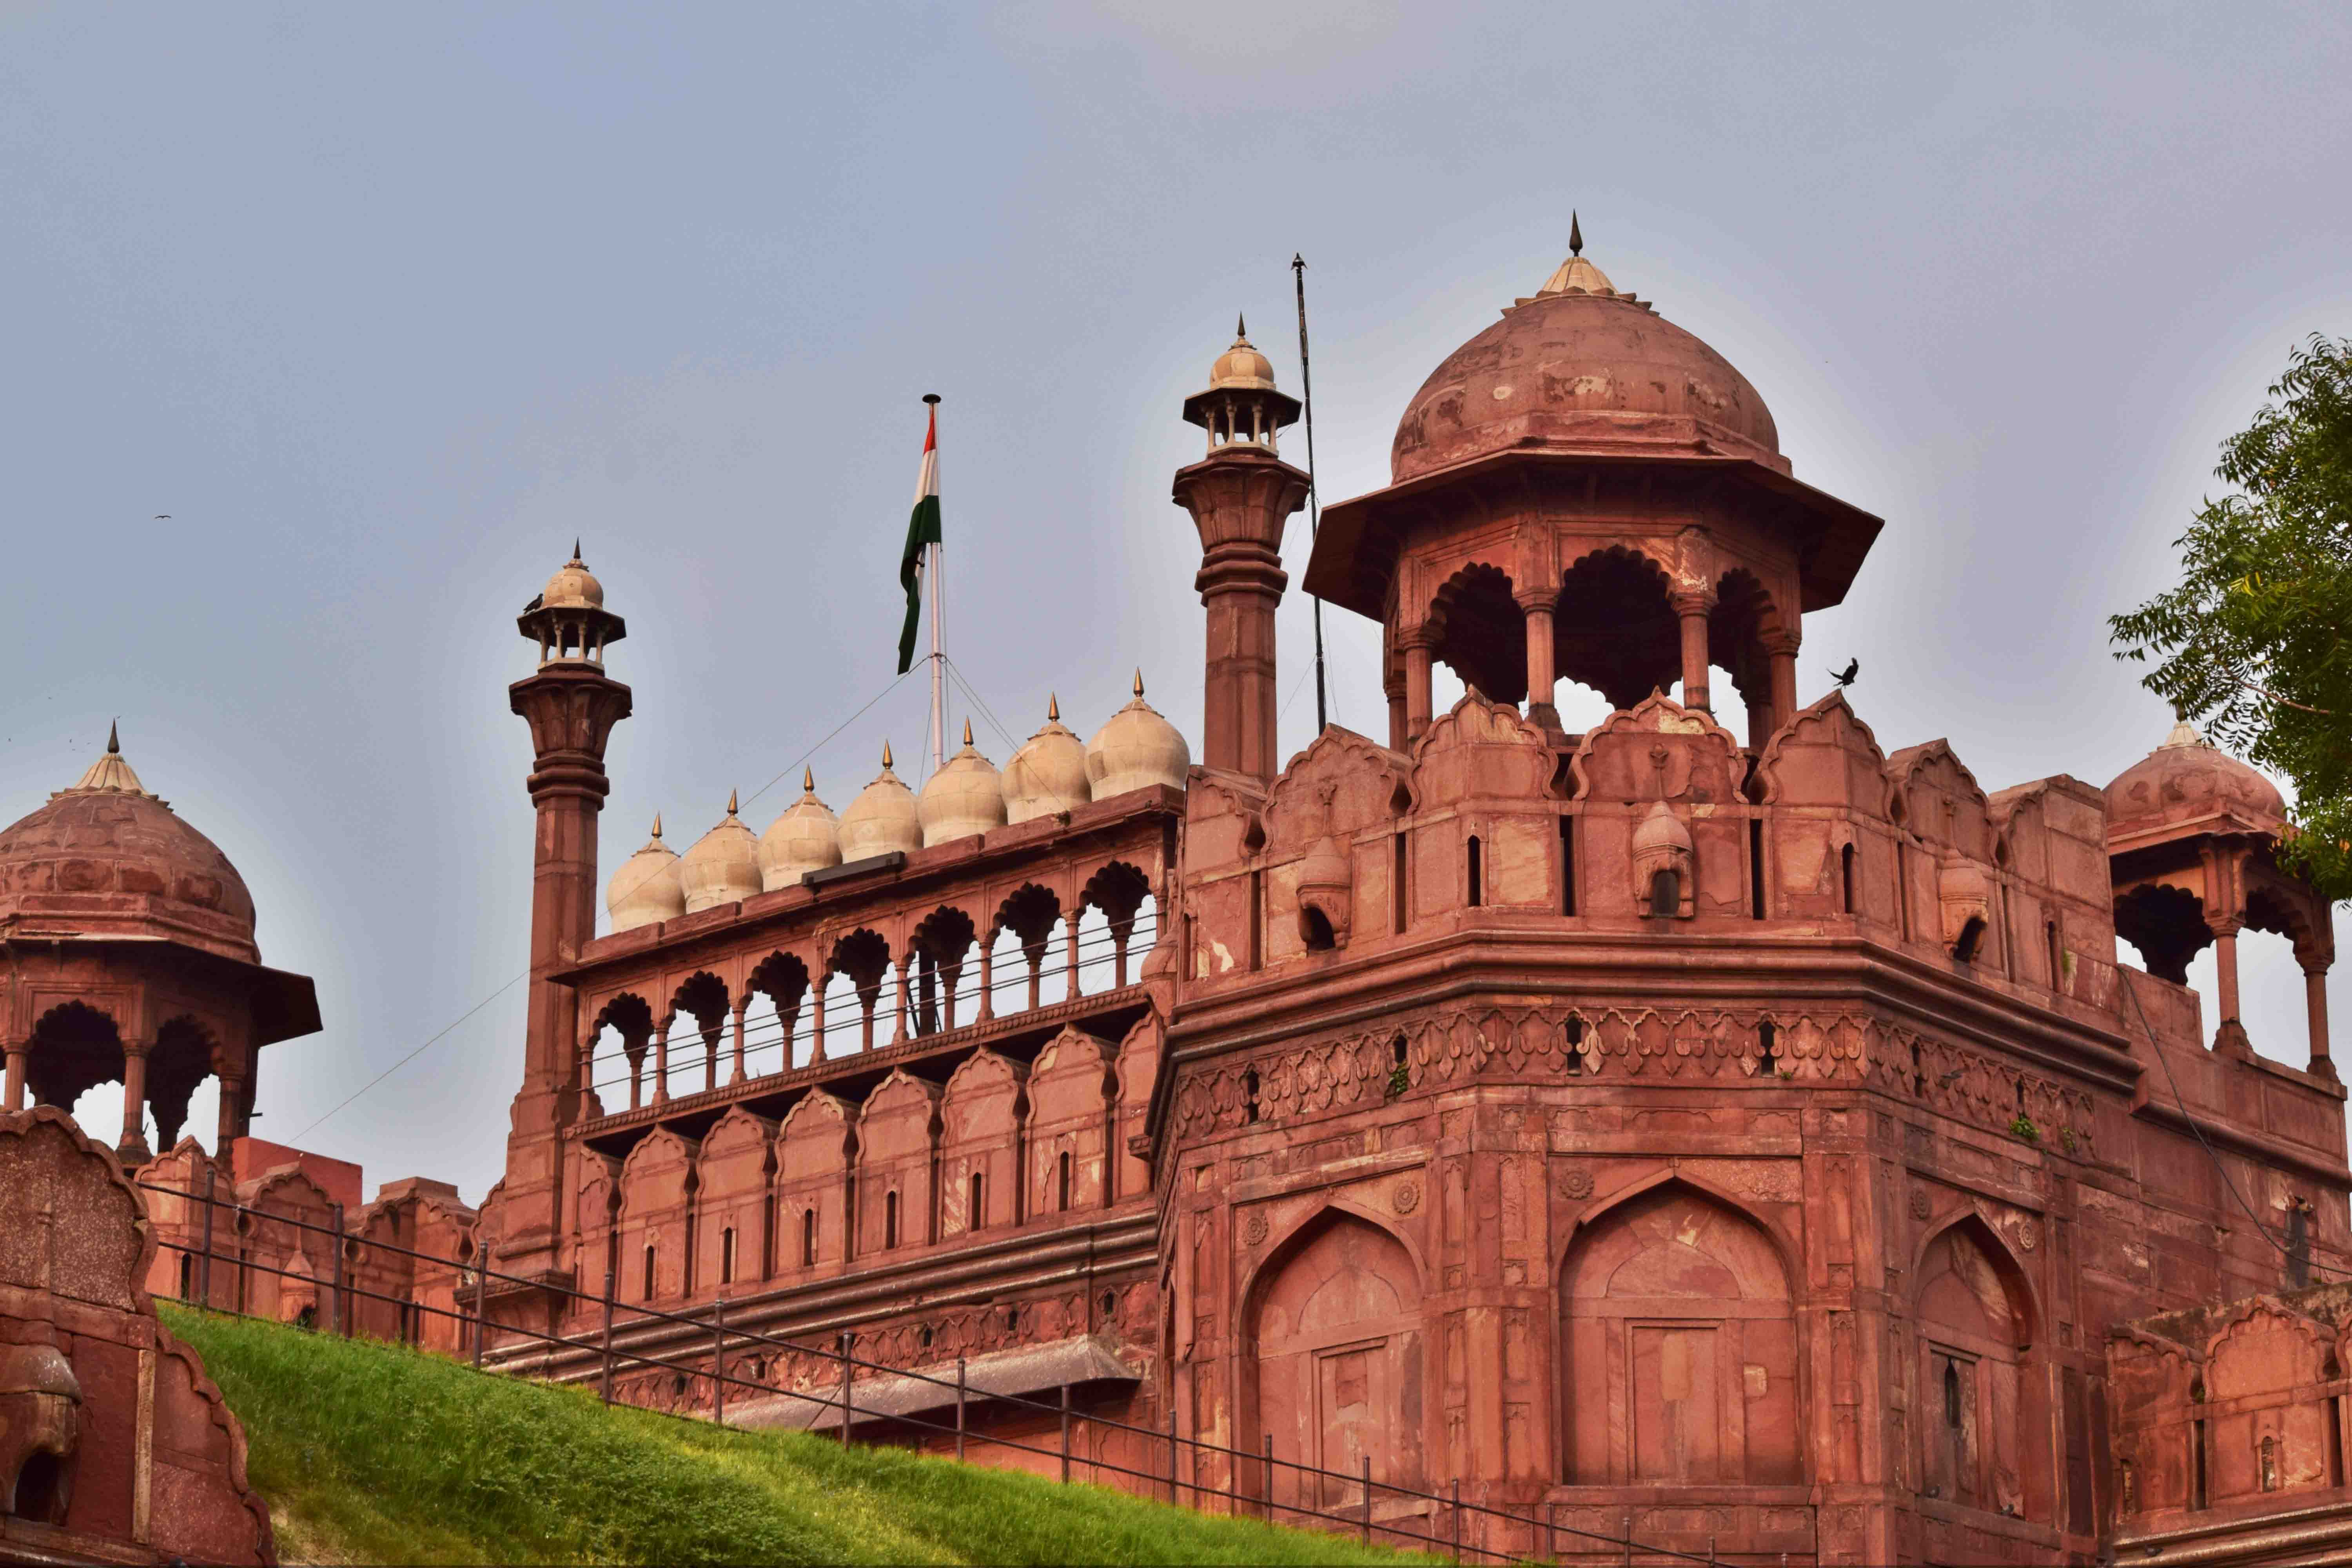 Coloring Red Fort(लाल क़िला),Delhi l Coloring pages for kidsl LearnByArt -  YouTube | Red fort, Cute wallpapers, Fort